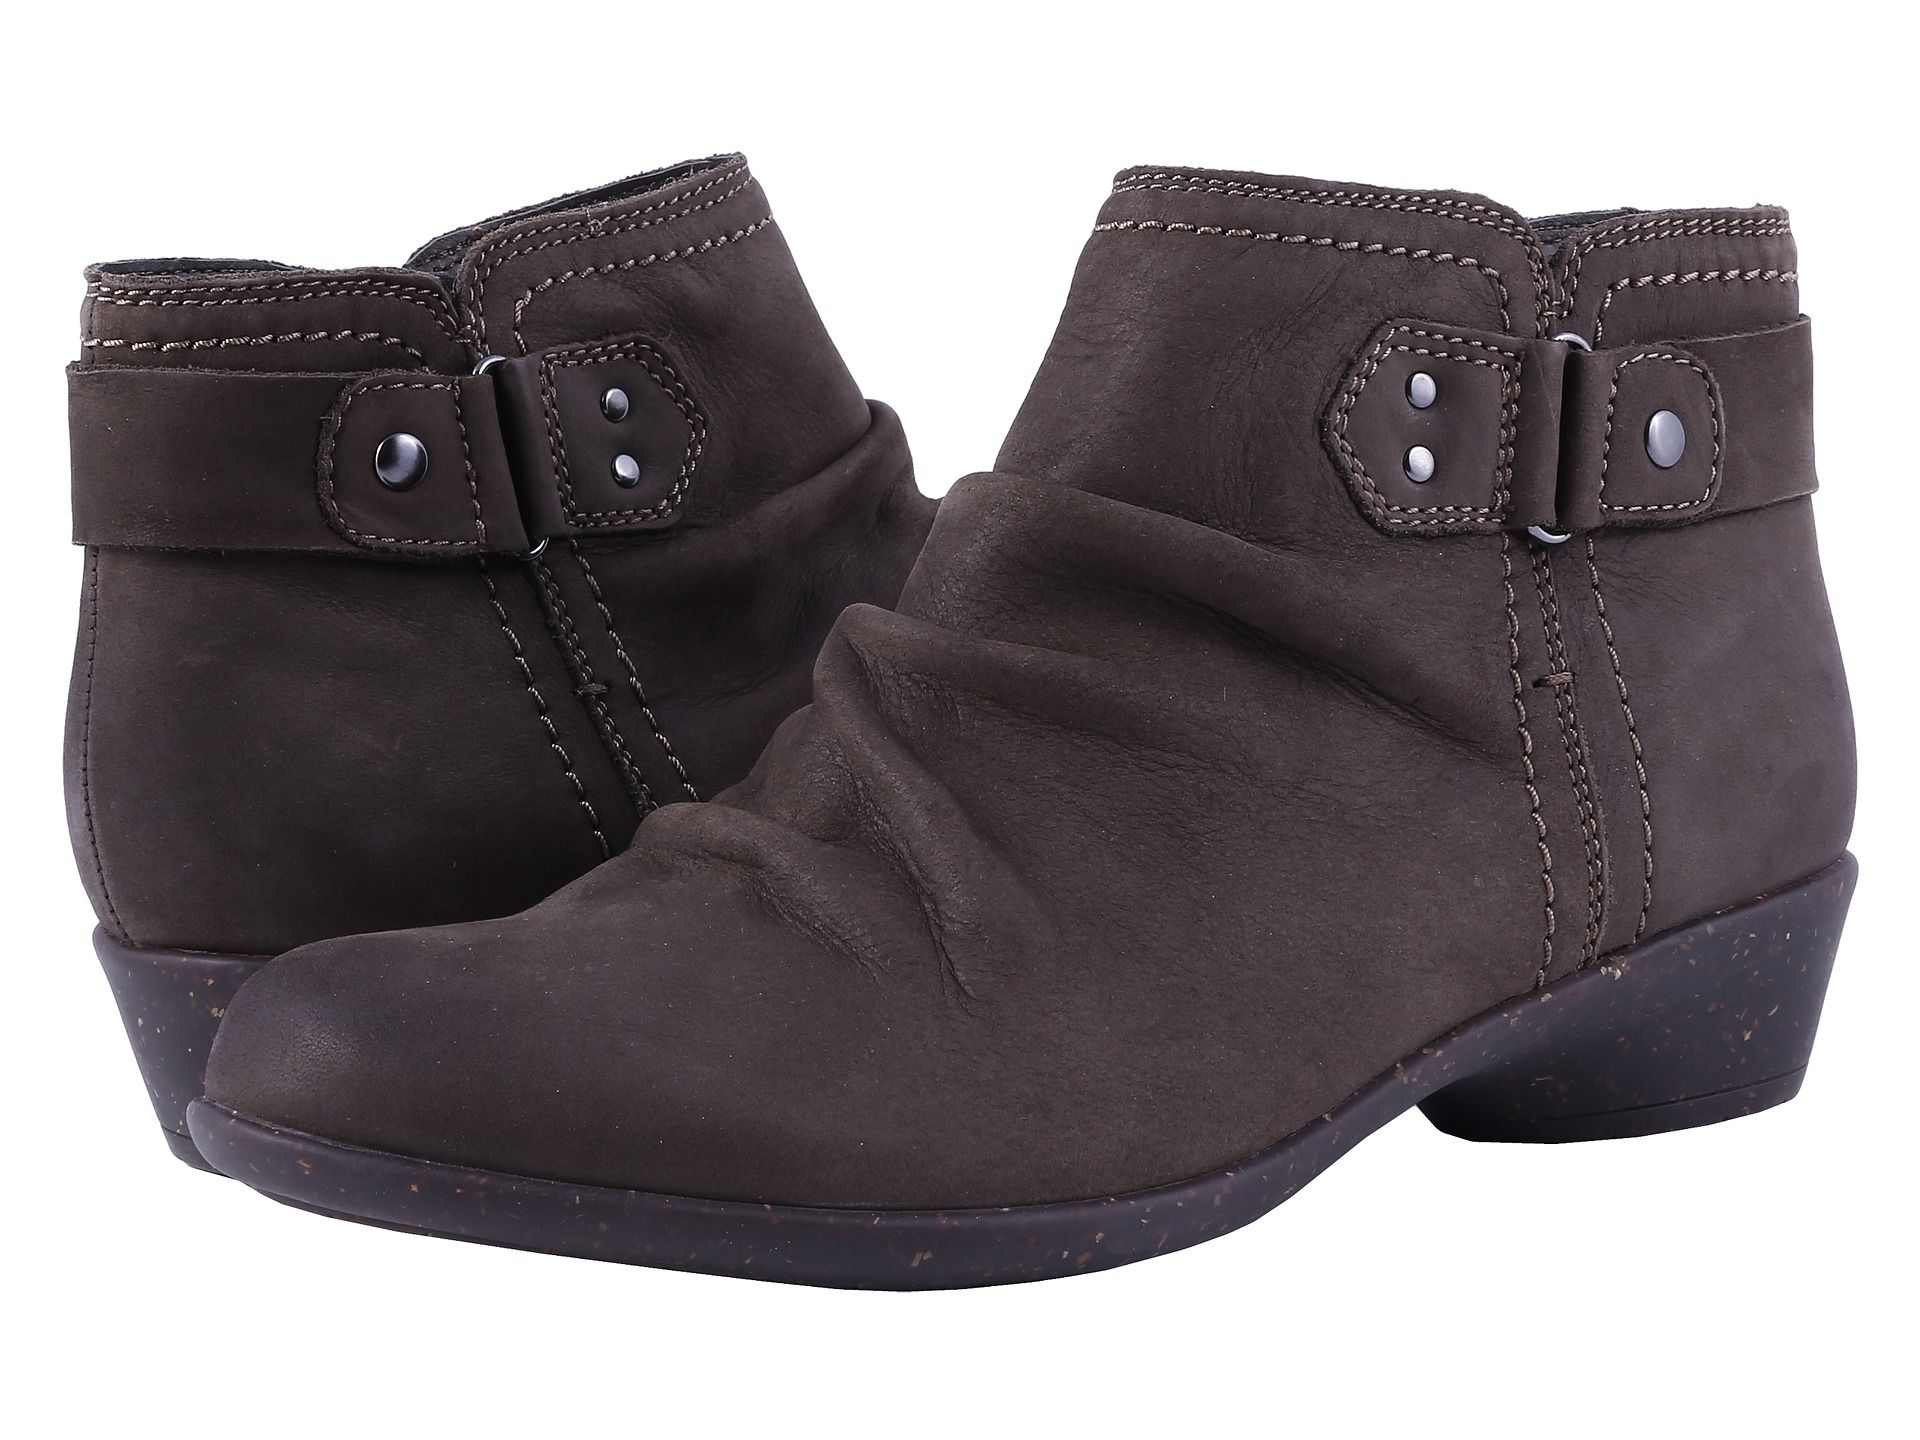 Rockport Cobb Hill Collection Cobb Hill Nicole | Zappos